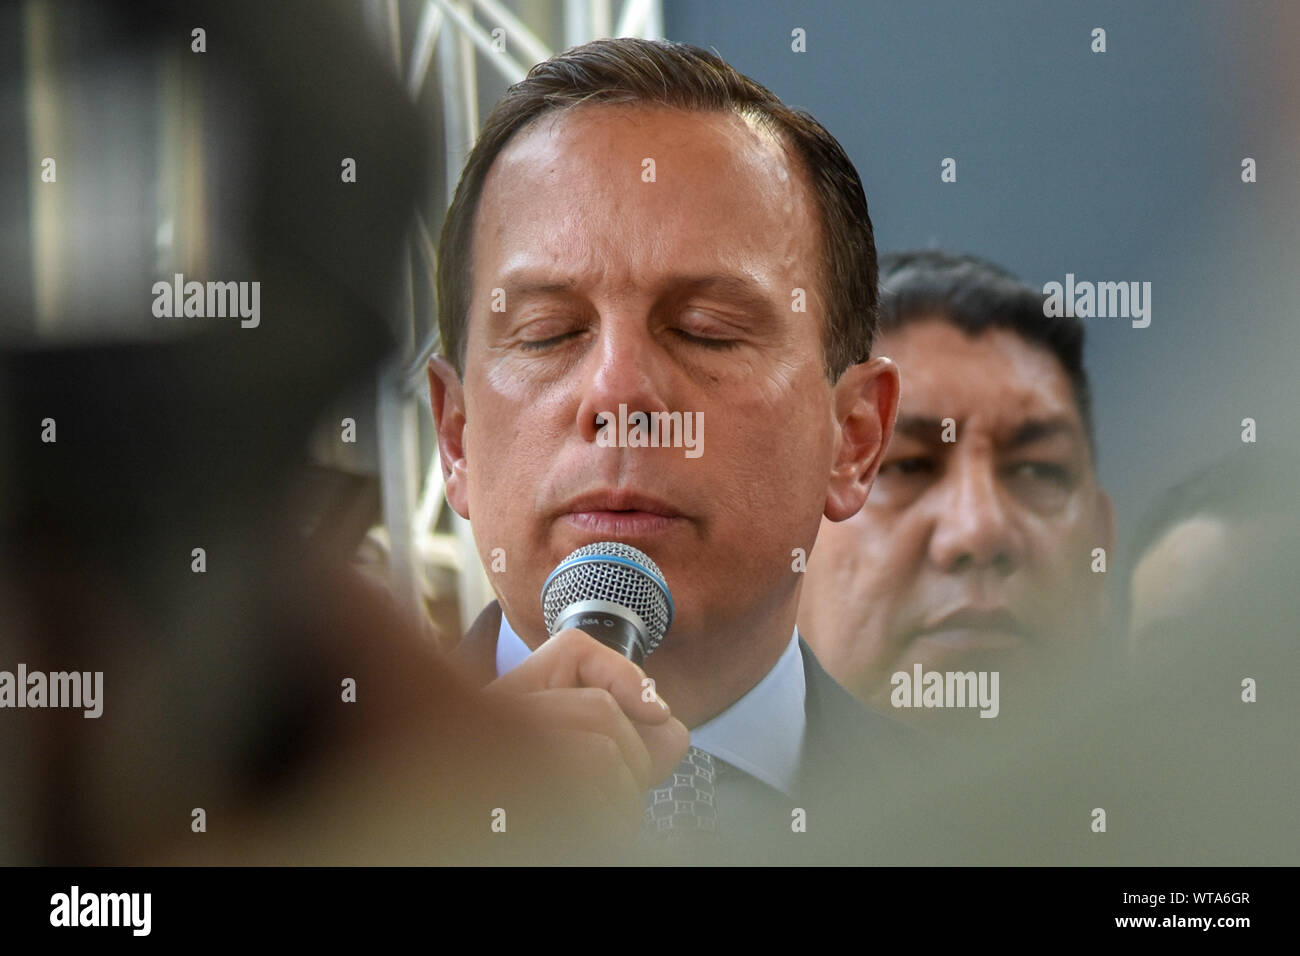 SÃO PAULO, SP - 11.09.2019: INAUGURAÇÃO DISTRITO POLICIAL NO BRÁS - João Doria, (PSDB) Governor of São Paulo, during the inauguration of the new facilities of the 8th Police District in Brás, according to the government, the reform and expansion will allow improvements in the working conditions of police and public service, this Wednesday (11 ). (Photo: Roberto Casimiro/Fotoarena) Stock Photo